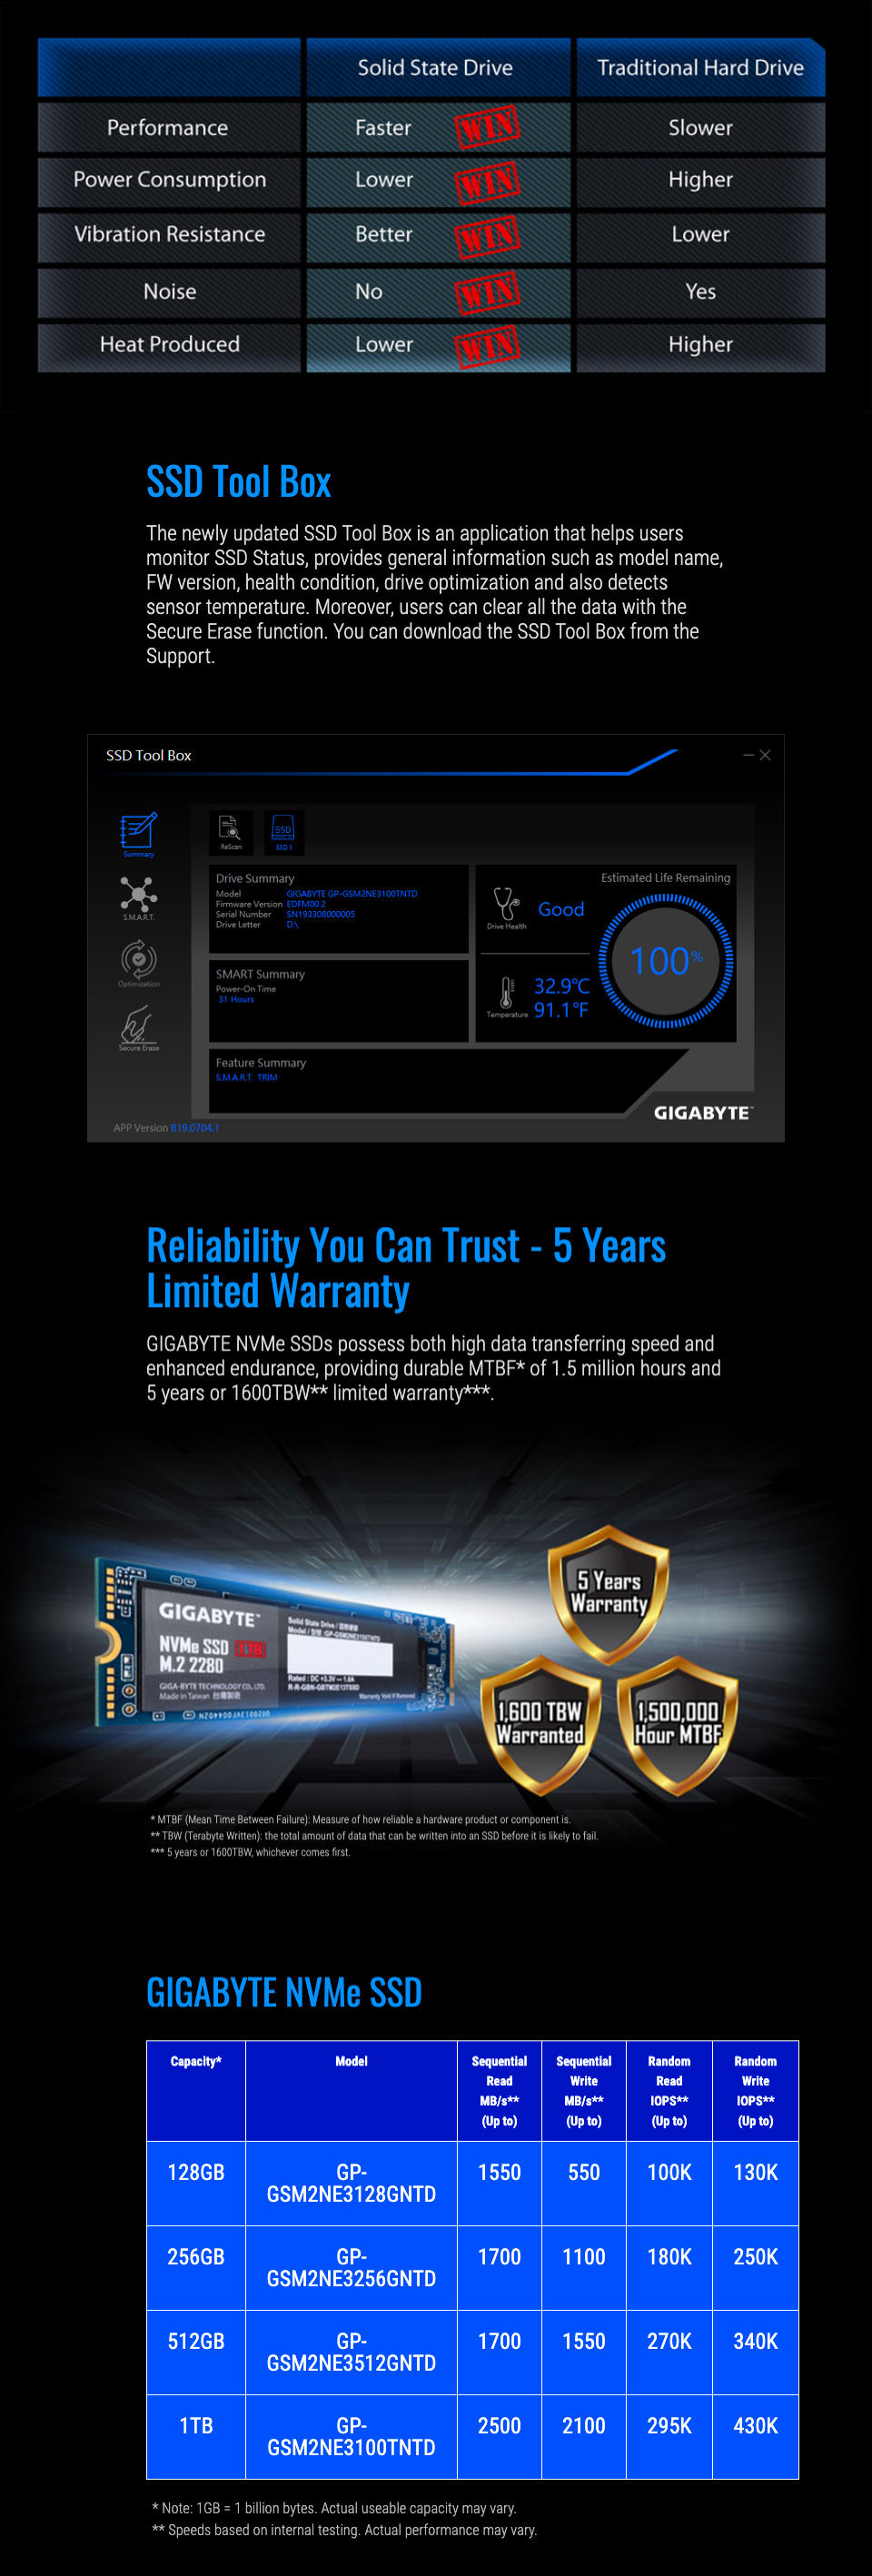 Gigabyte GSM2NE3 M.2 NVMe Solid State Drive 1TB features